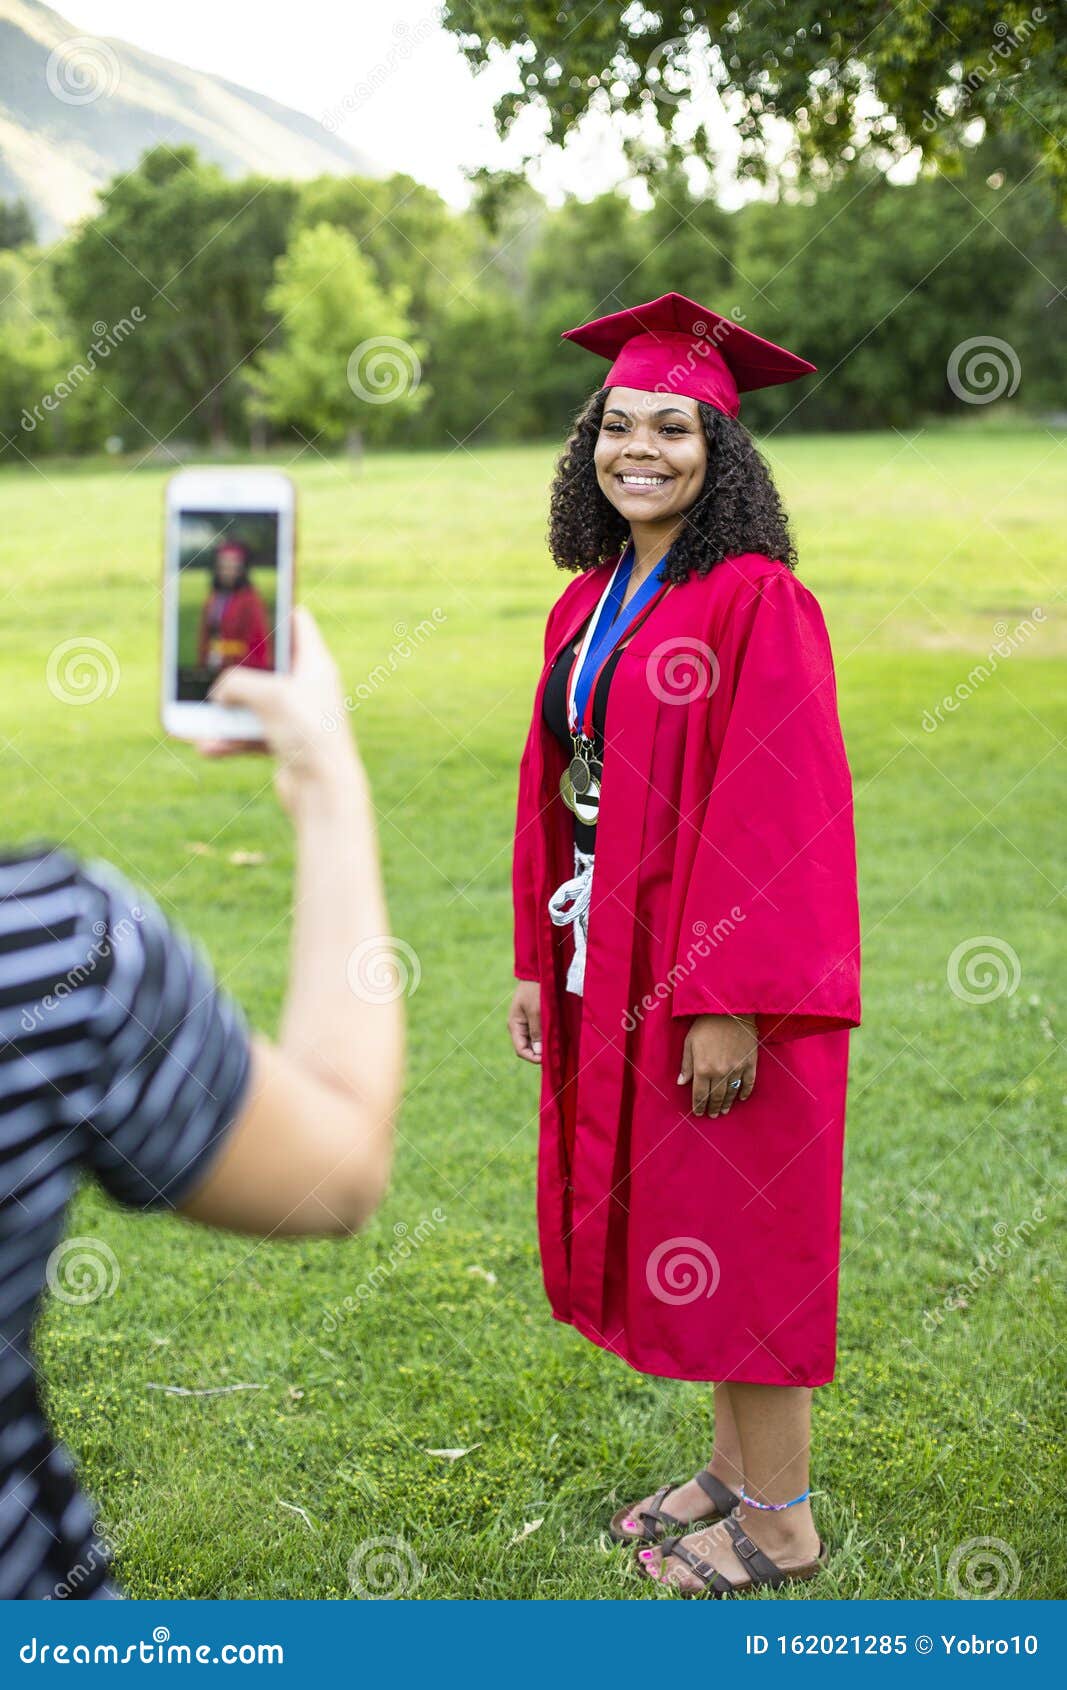 taking a smartphone photo of a recent high school graduate in her cap and gown